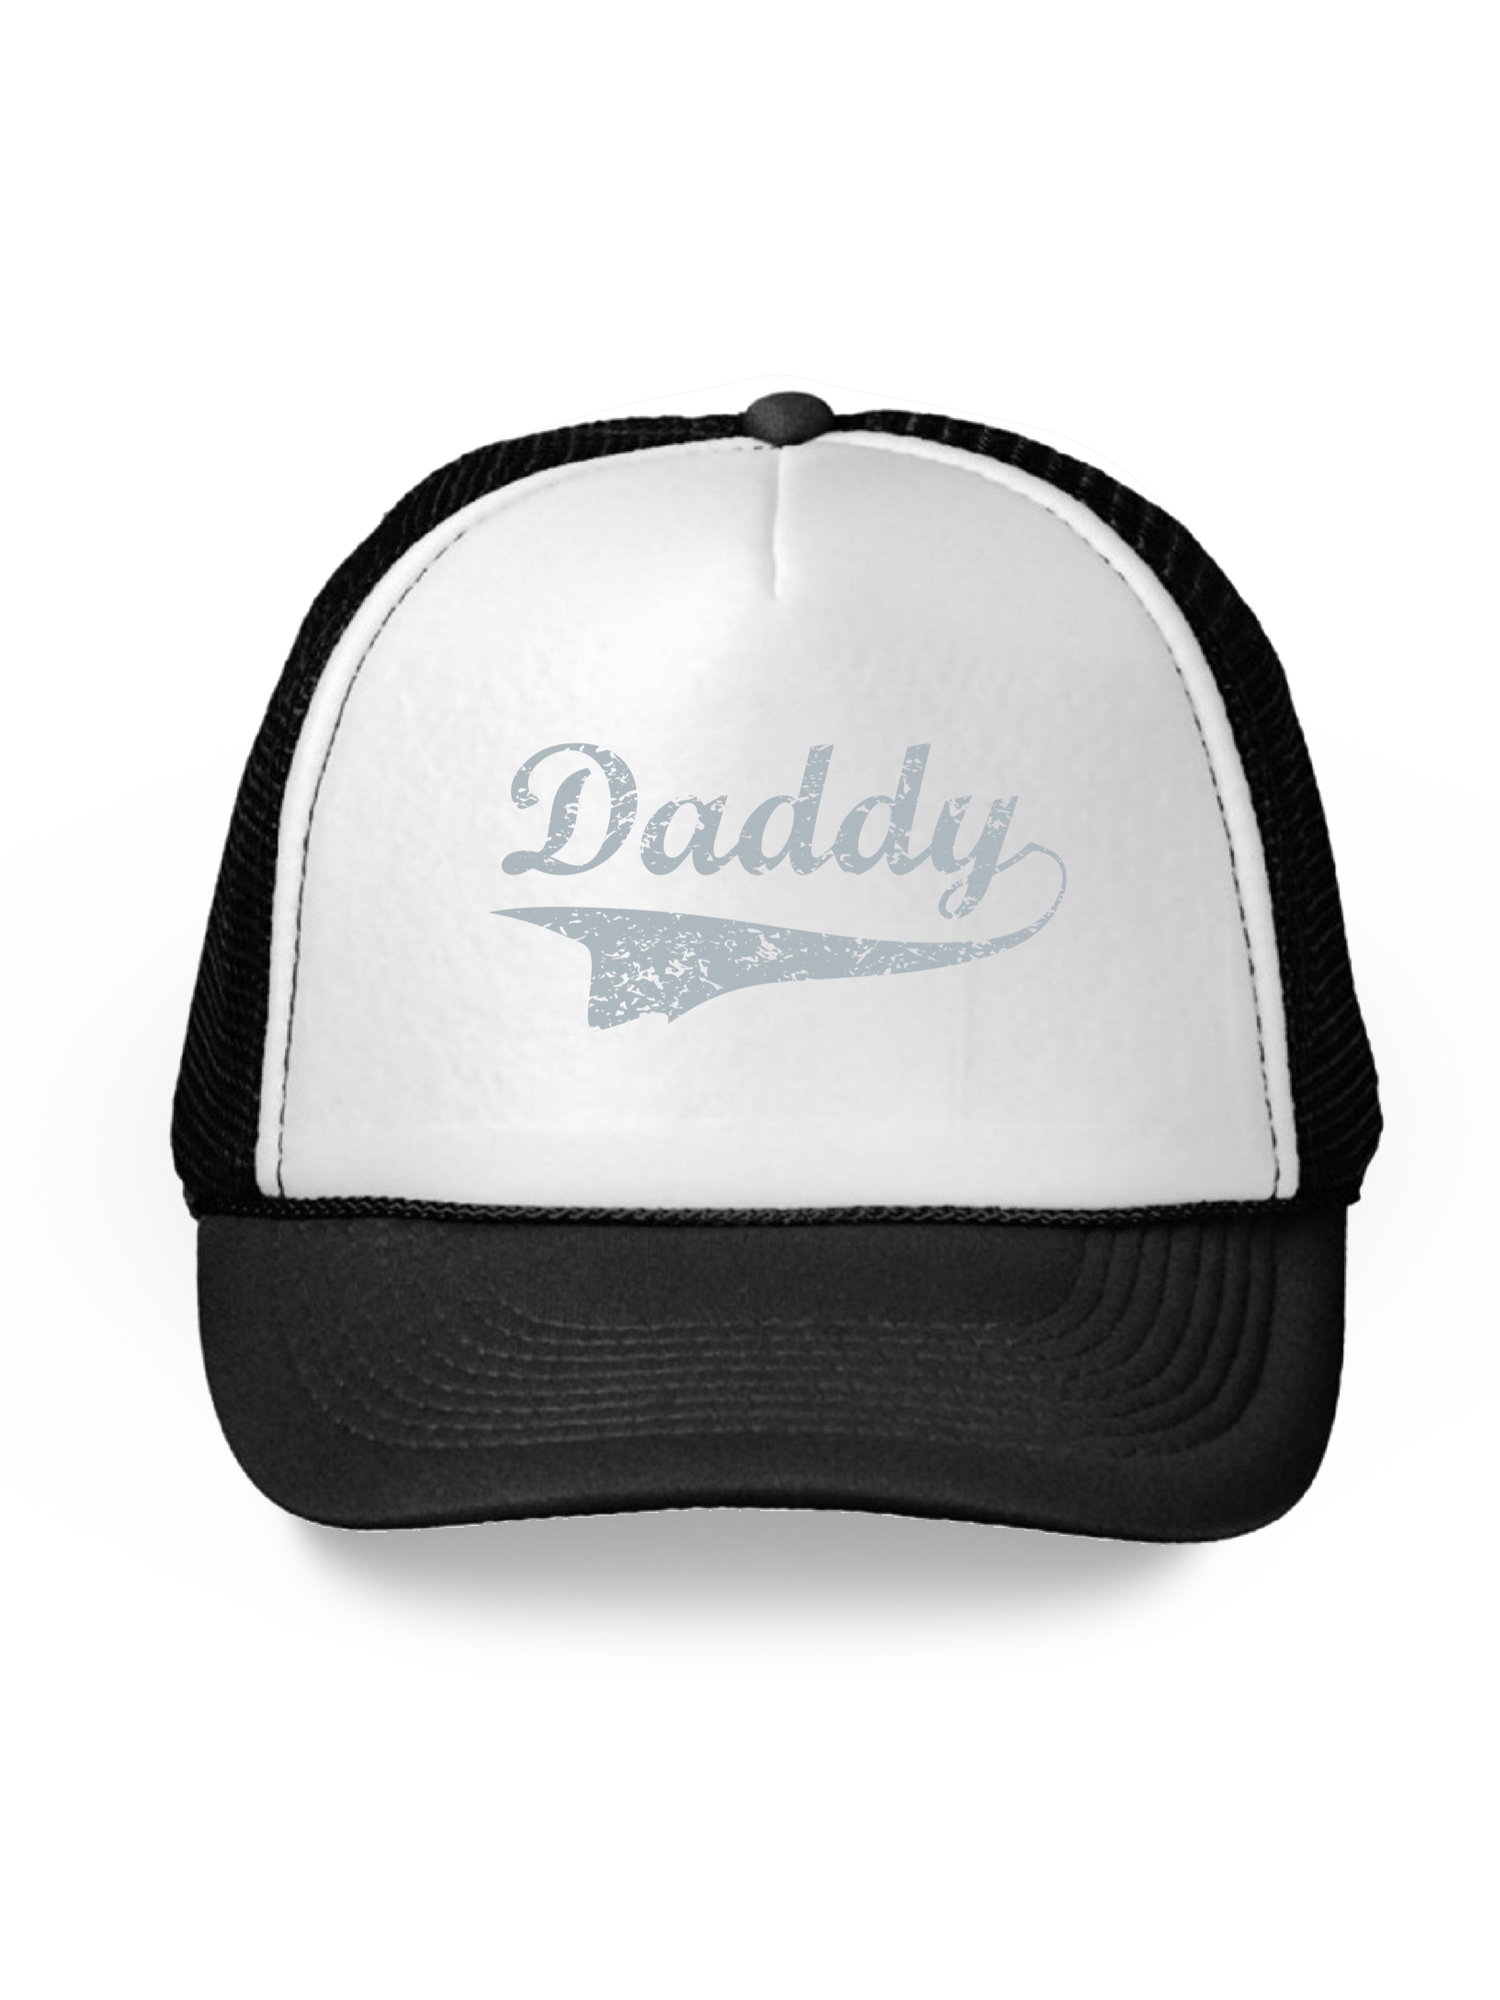 Awkward Styles Daddy Hat Father's Day Gifts for Men Dad Hats Dad 2018 Trucker Hat Funny Gifts for Dad Hat Accessories for Men Father Trucker Hat Daddy 2018 Snapback Hat Dad Hats with Sayings - image 1 of 6